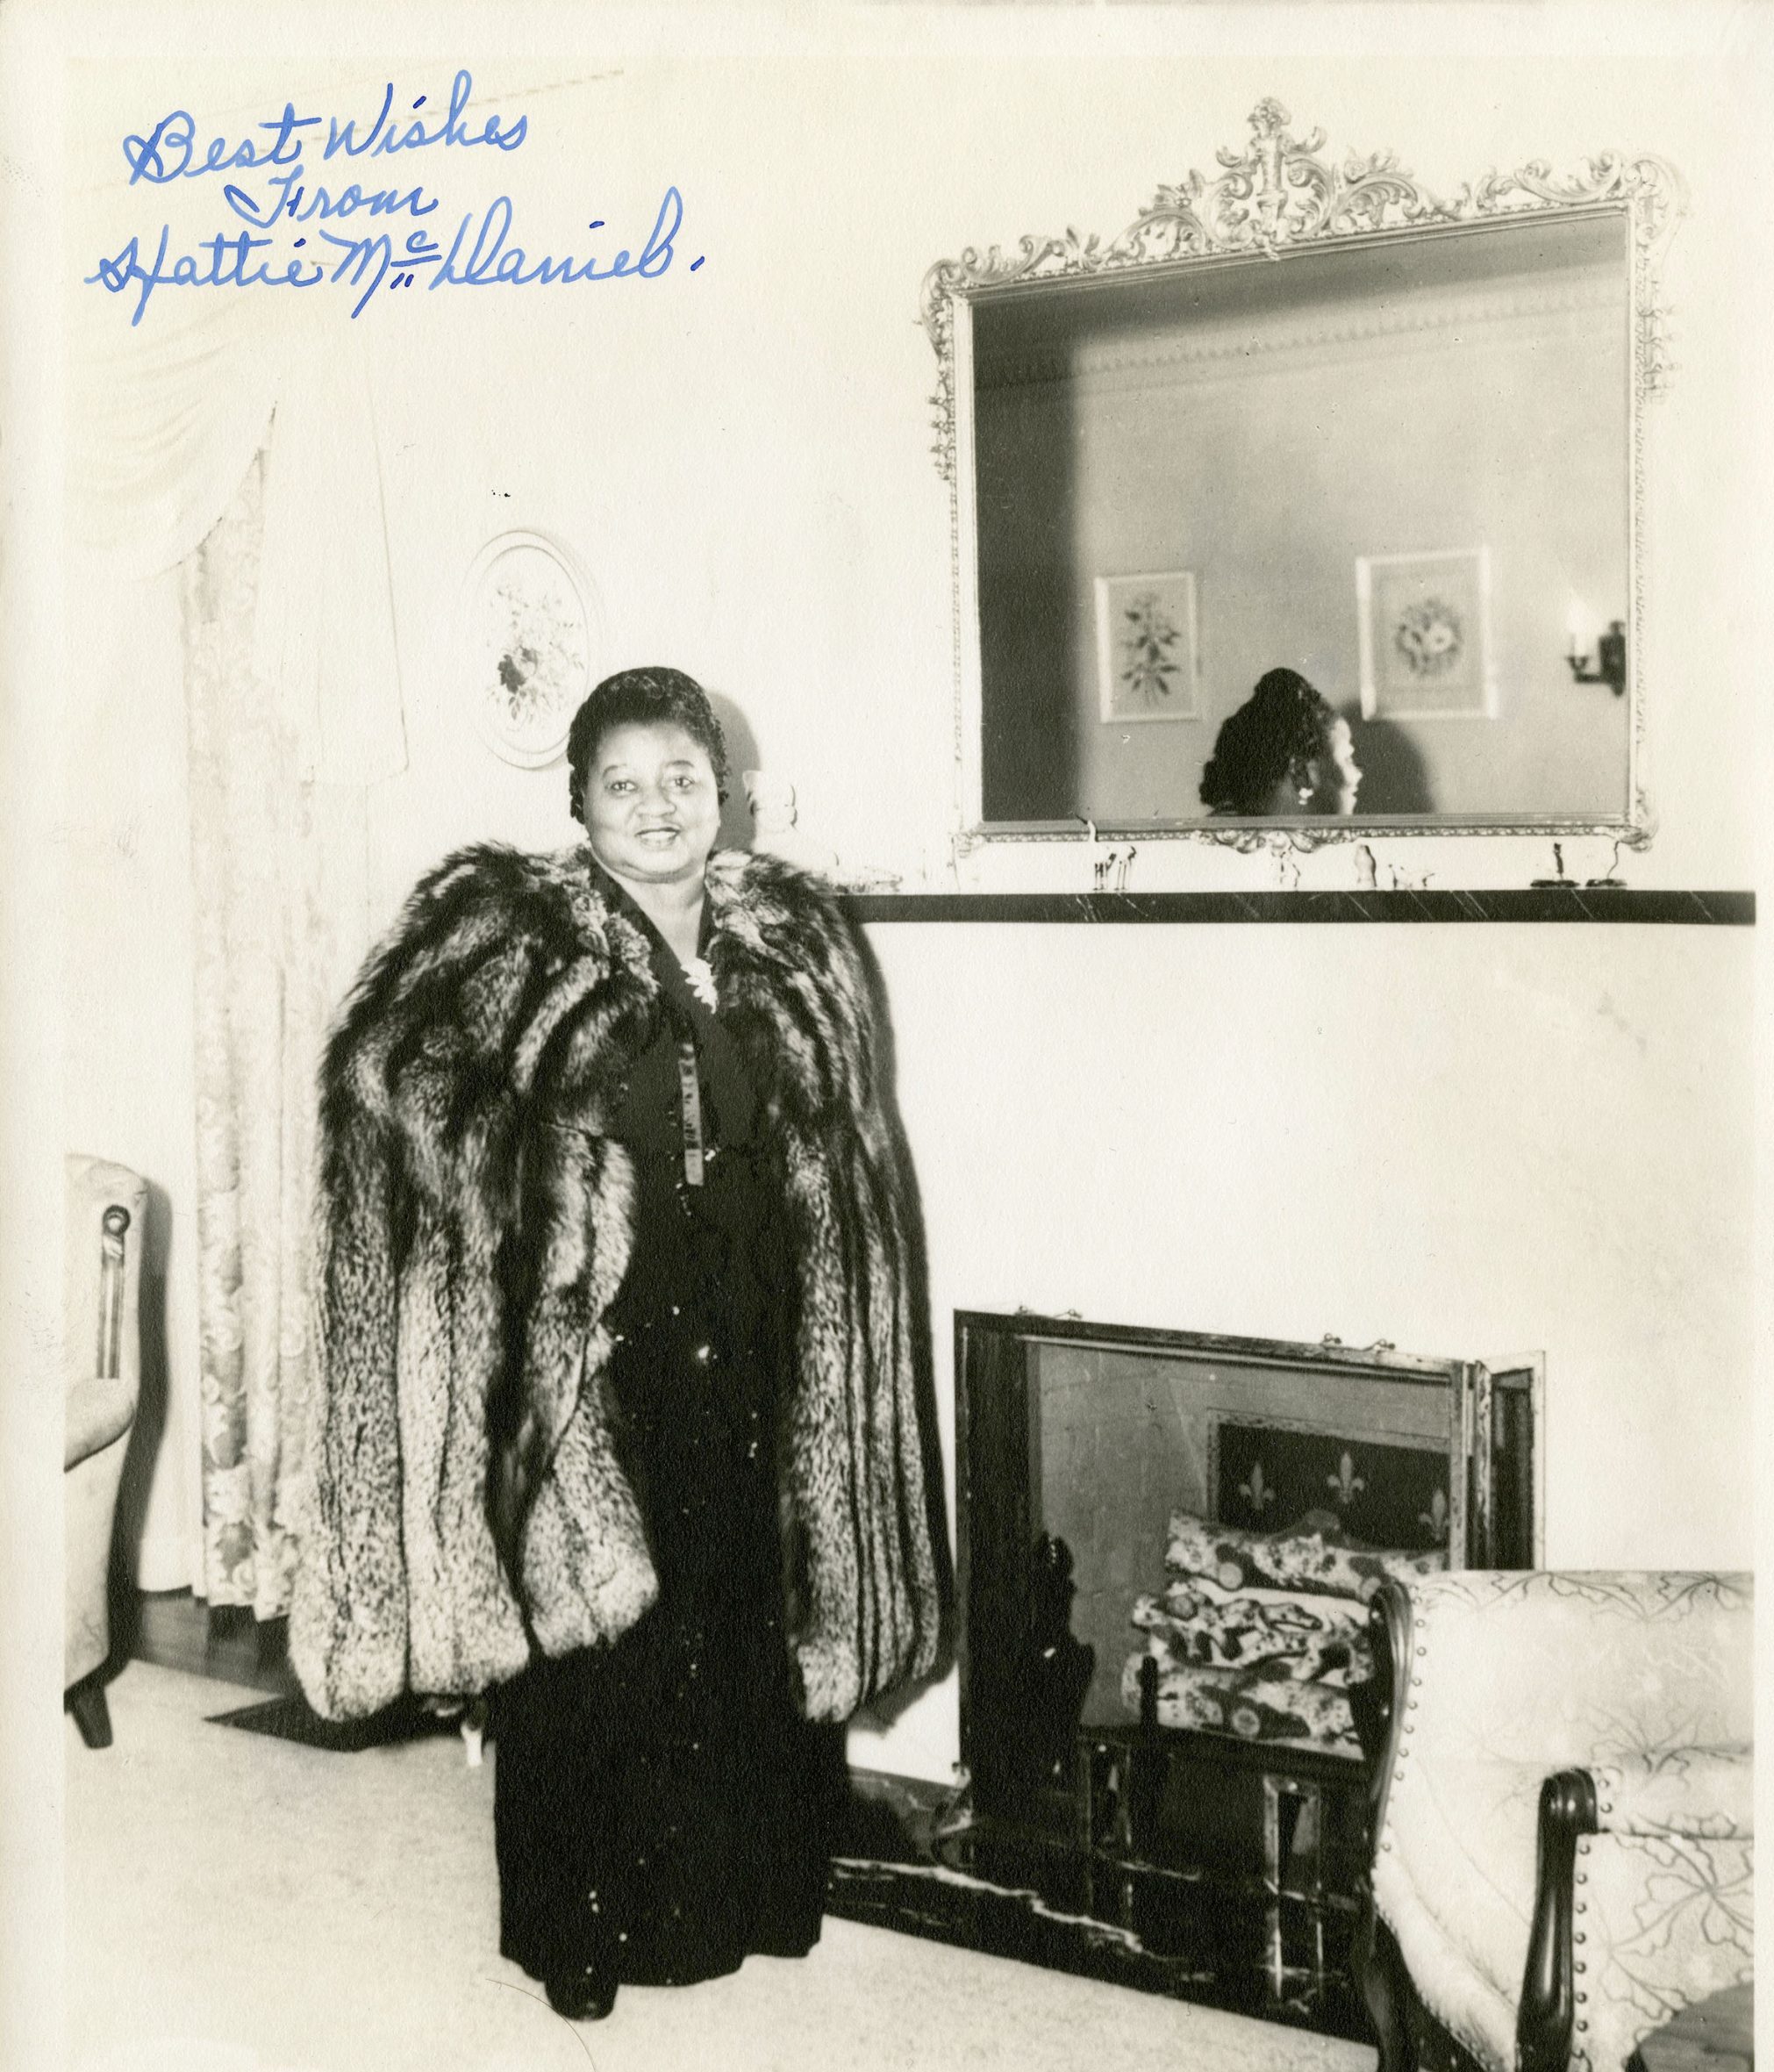 signed photo that reads 'Best Wishes from Hattie McDaniel' (link to file)